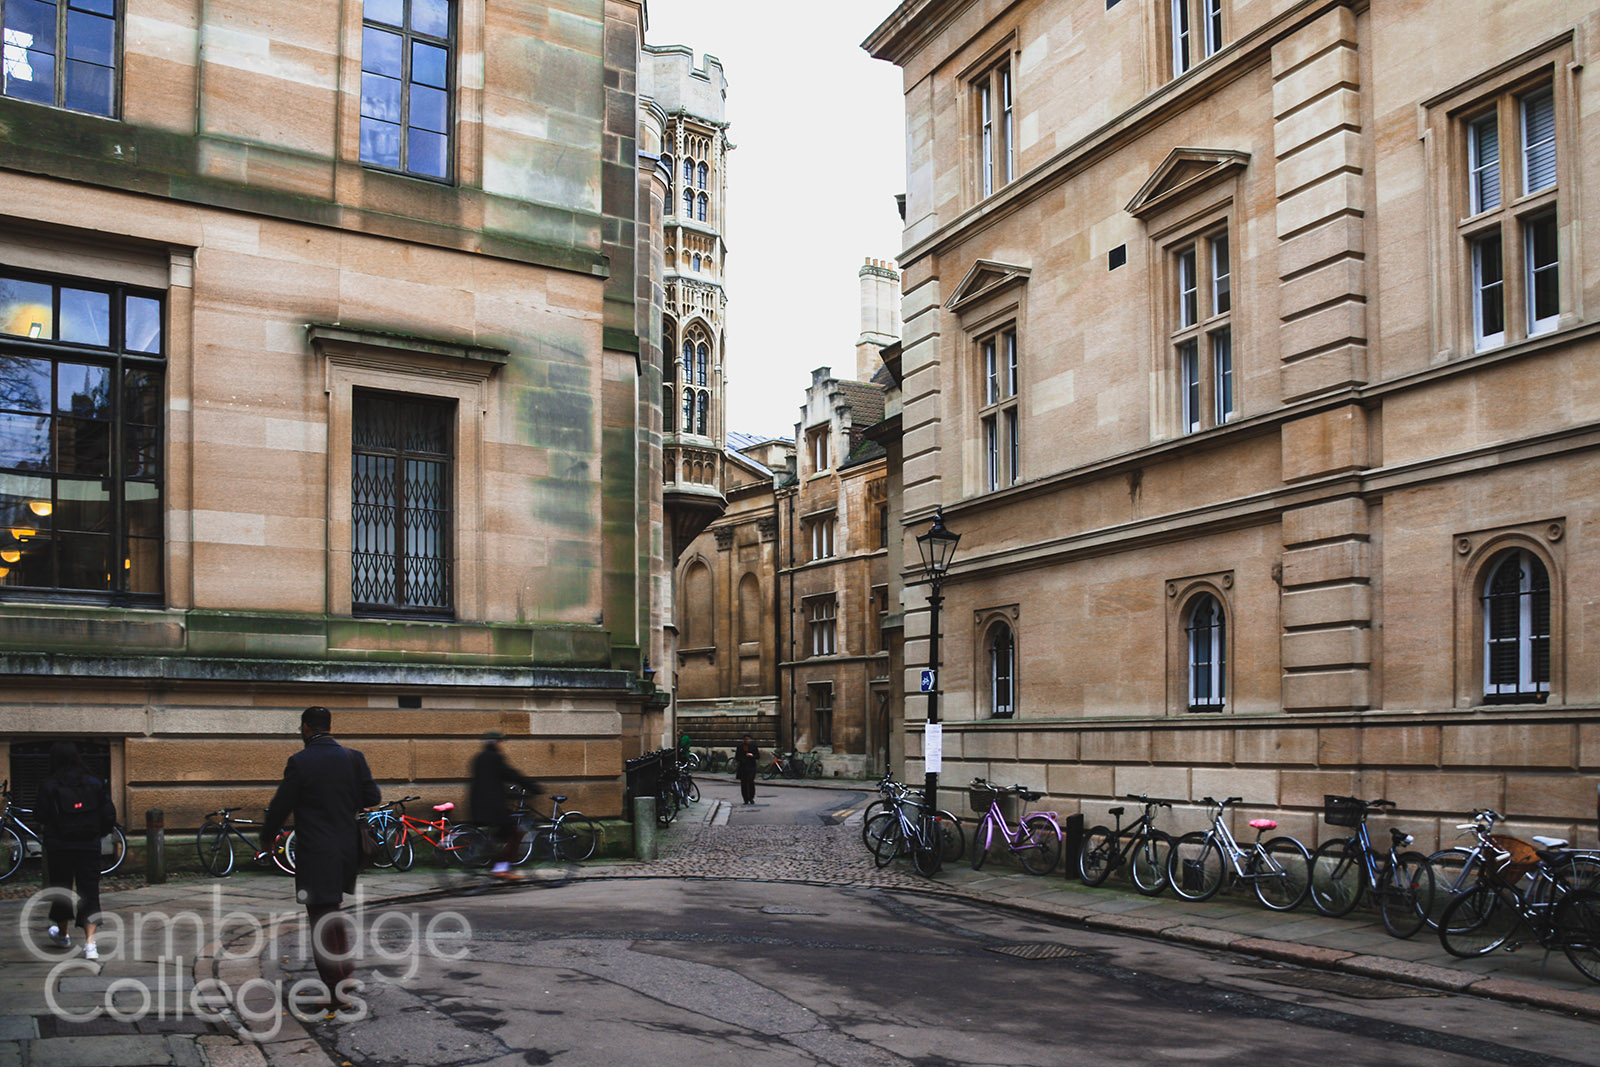 The point where Trinity Hall, Clare and Gonville and Caius Colleges all meet